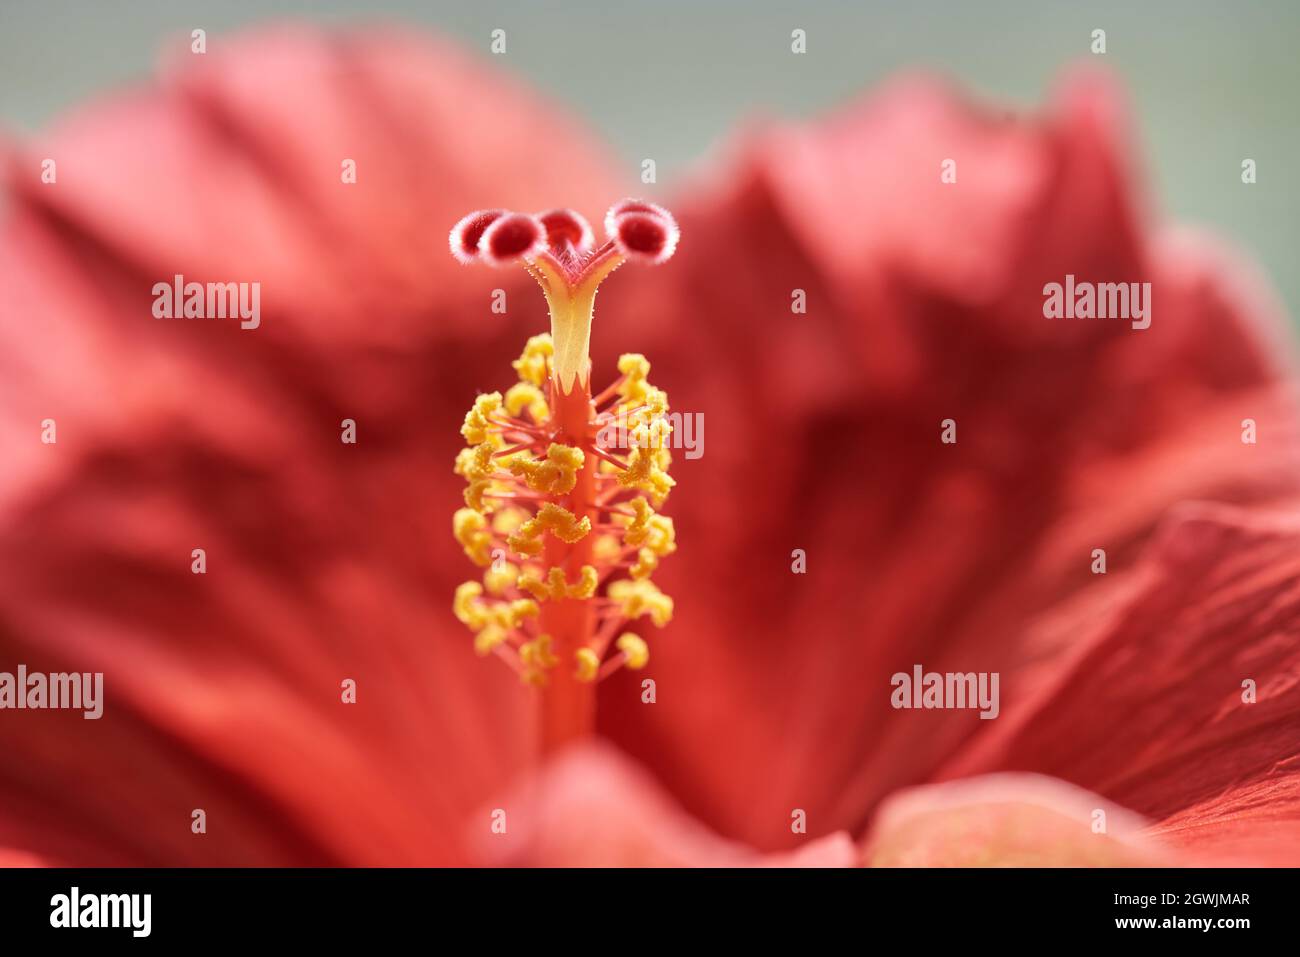 Closeup of a red hibiscus flower, stalk and pistil Stock Photo